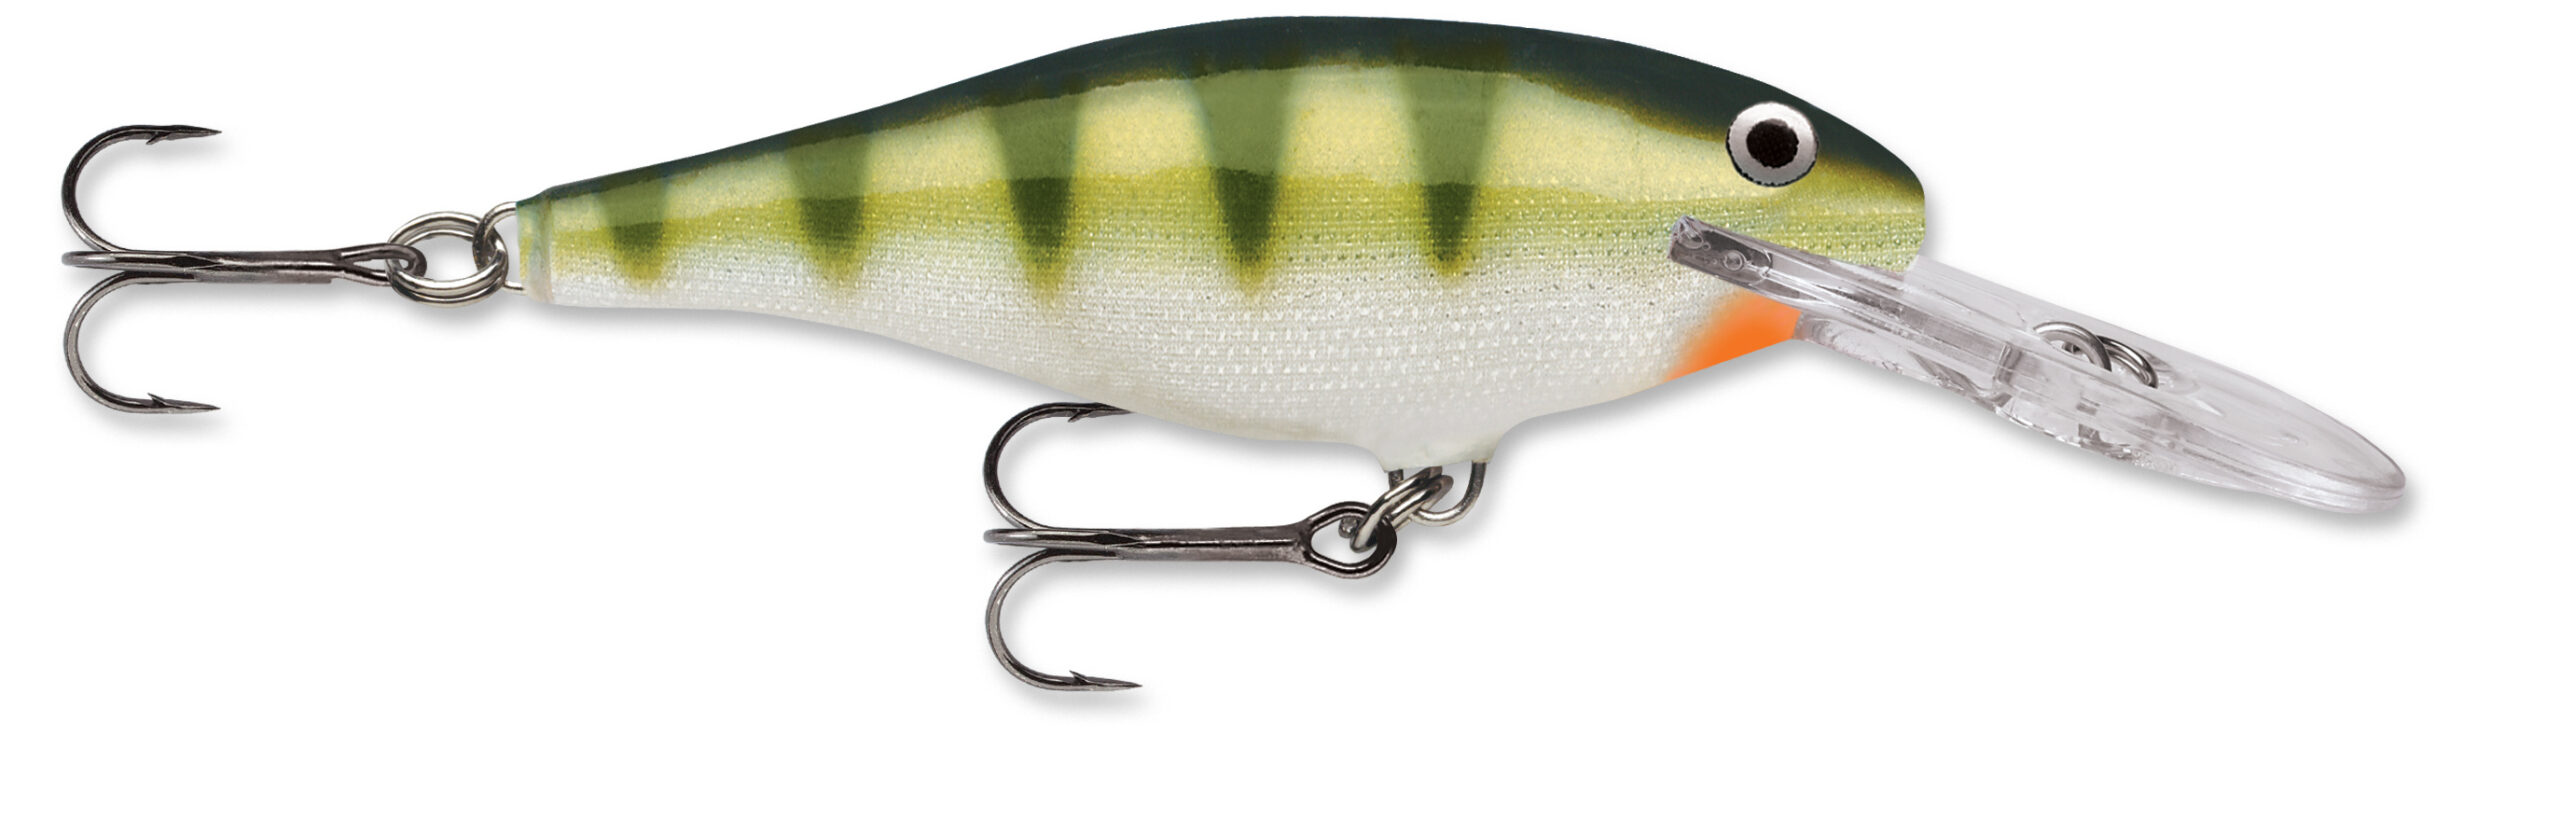 https://lachinebaitandtackle.com/wp-content/uploads/2021/09/Pourvoirie_Lachine_Bait_and_Tackle_Rapala_SSR-05_Yellow_Perch-scaled.jpg